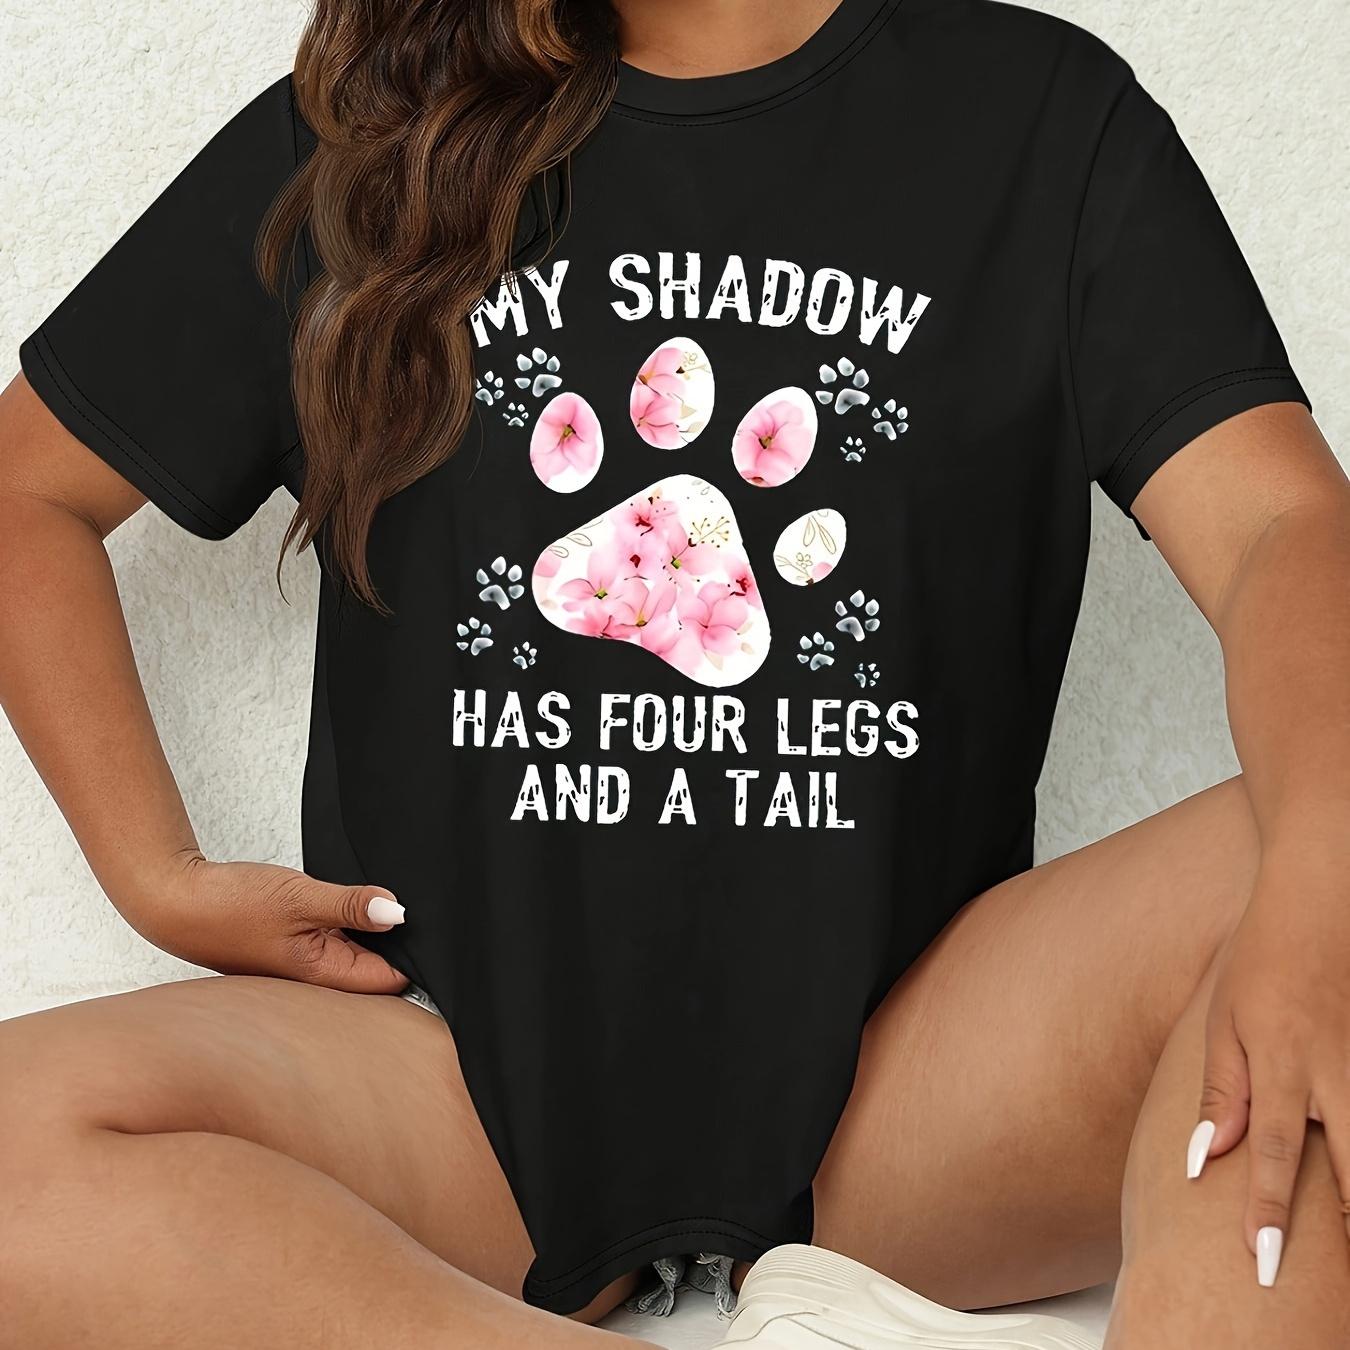 

Women's Plus Size Casual Sporty Tee With Cute Pinkish Paw Print & Quote, Fashionable Short Sleeve T-shirt For Ladies, Comfortable Relaxed Fit